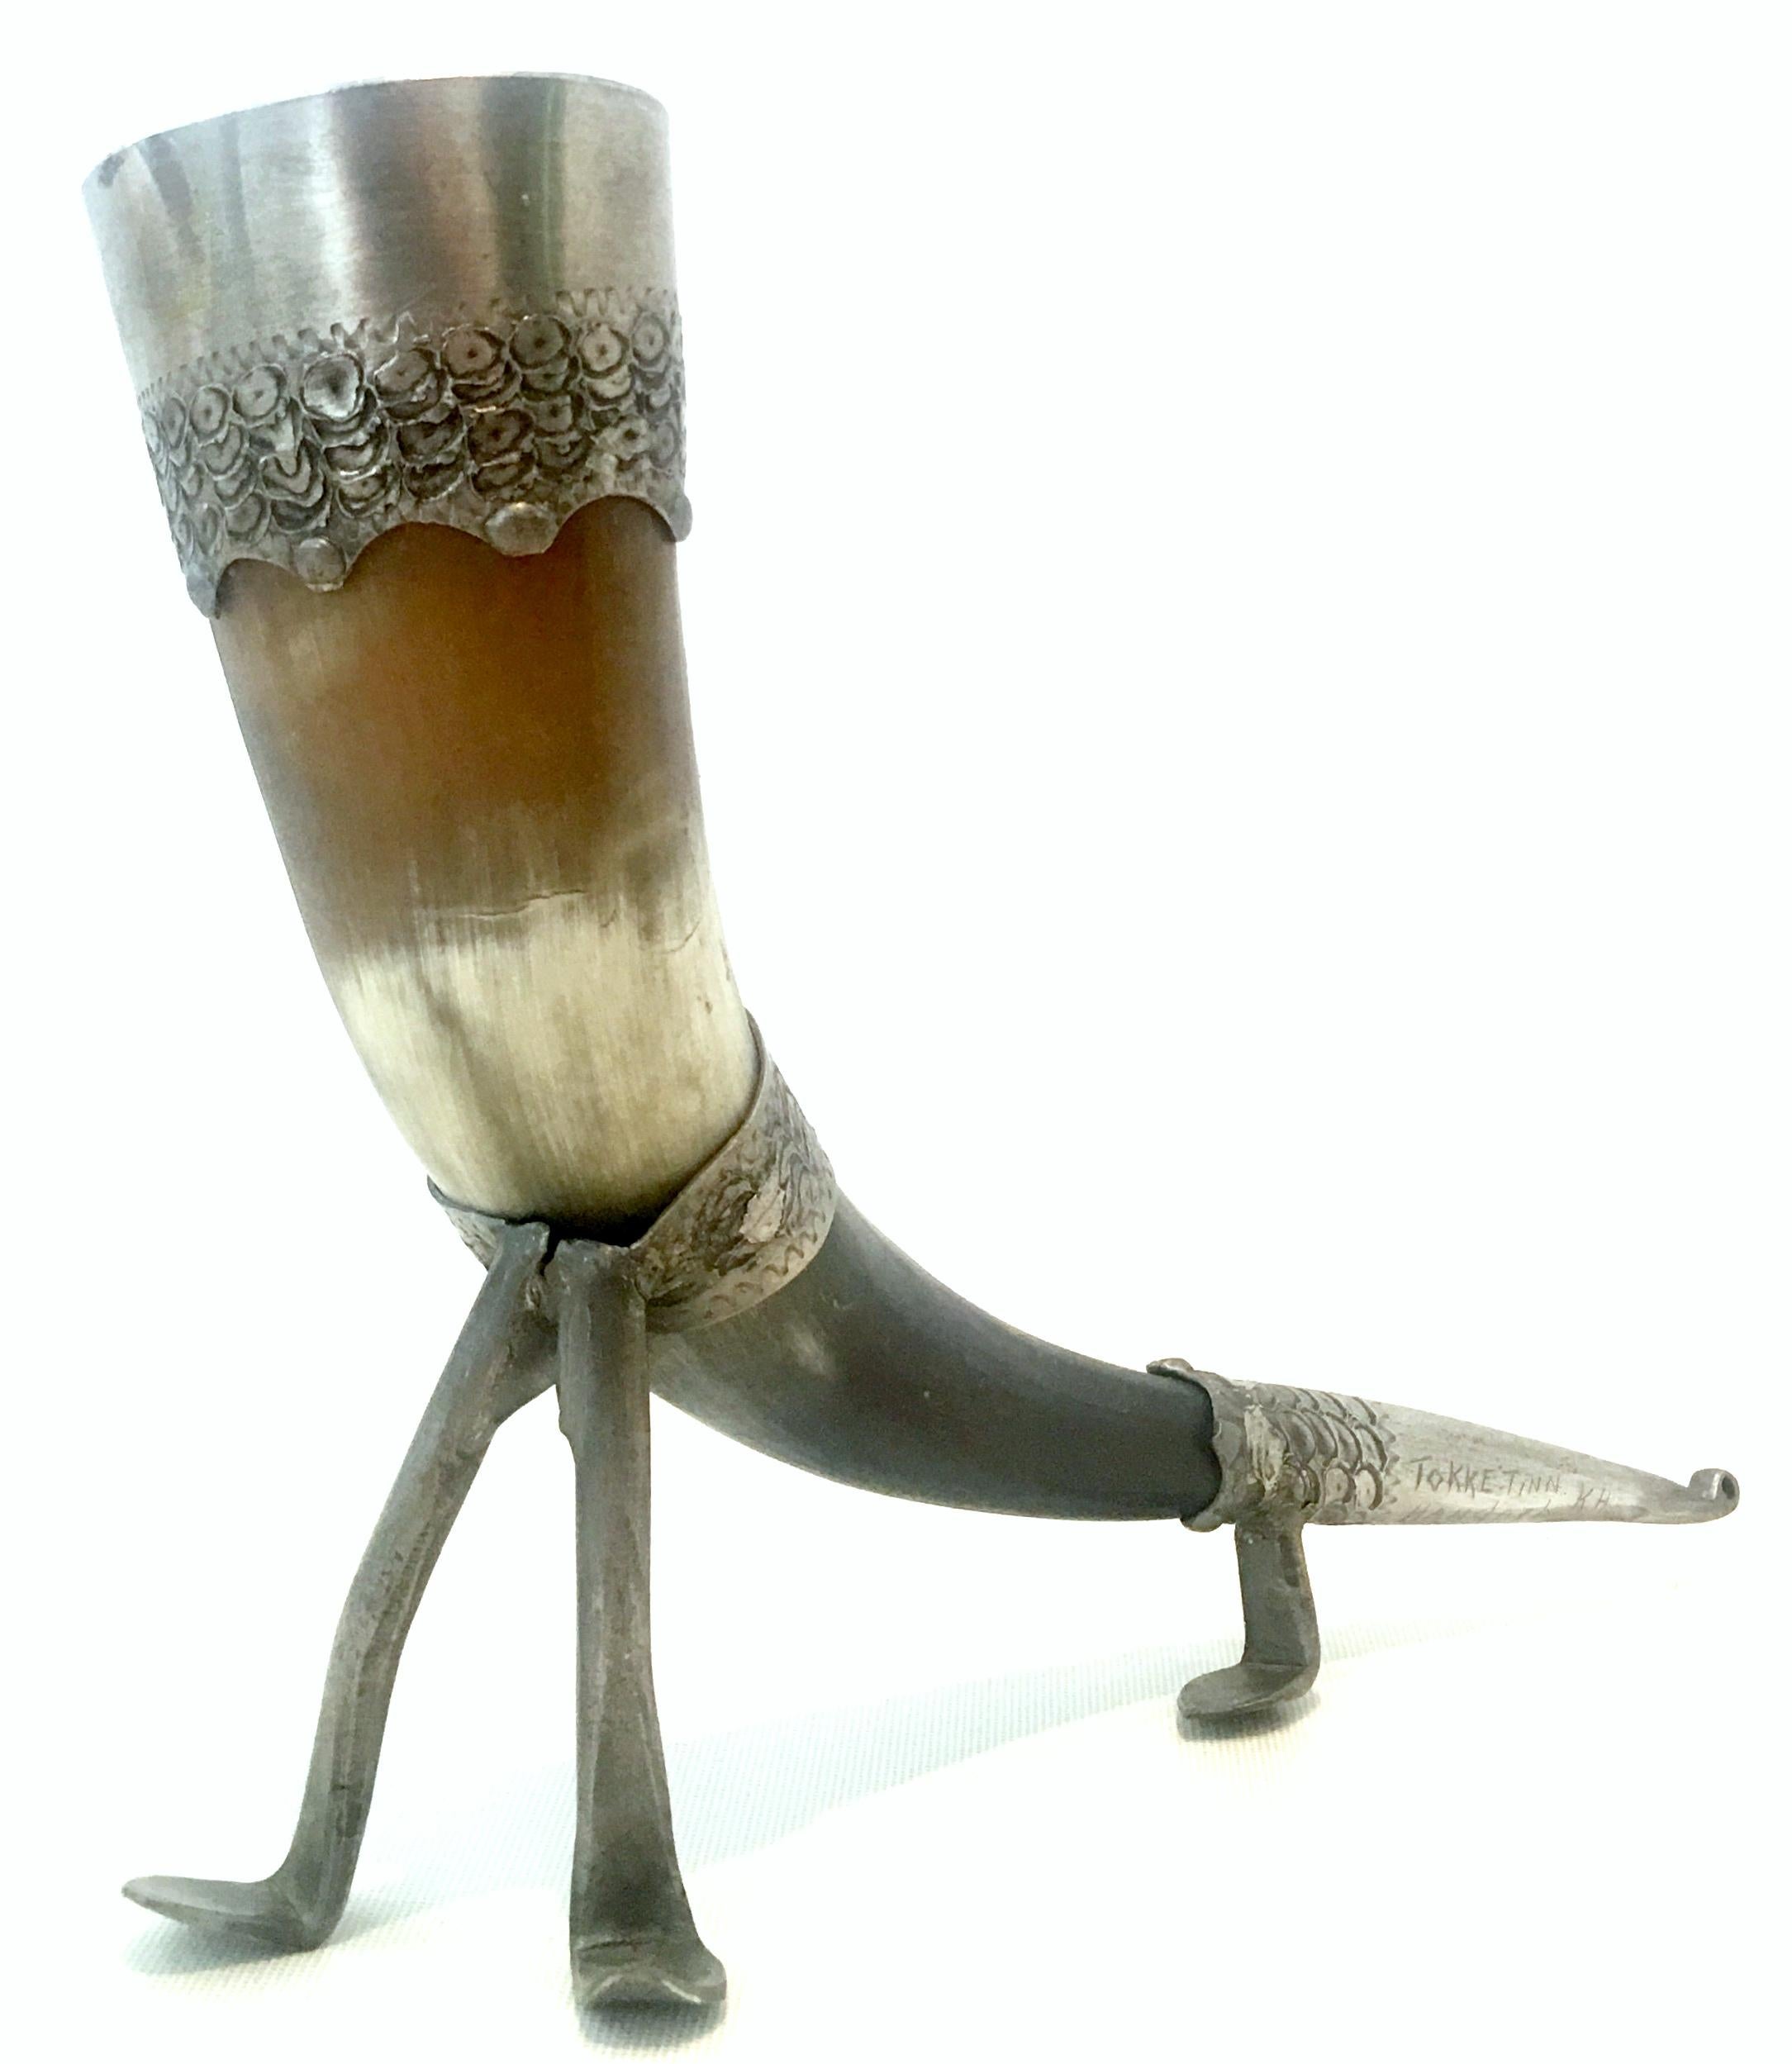 Early 20th century Norwegian horn and engraved pewter footed drinking cup. This handcrafted drinking horn features fitted engraved pewter handwork. Signed, engraved at the 